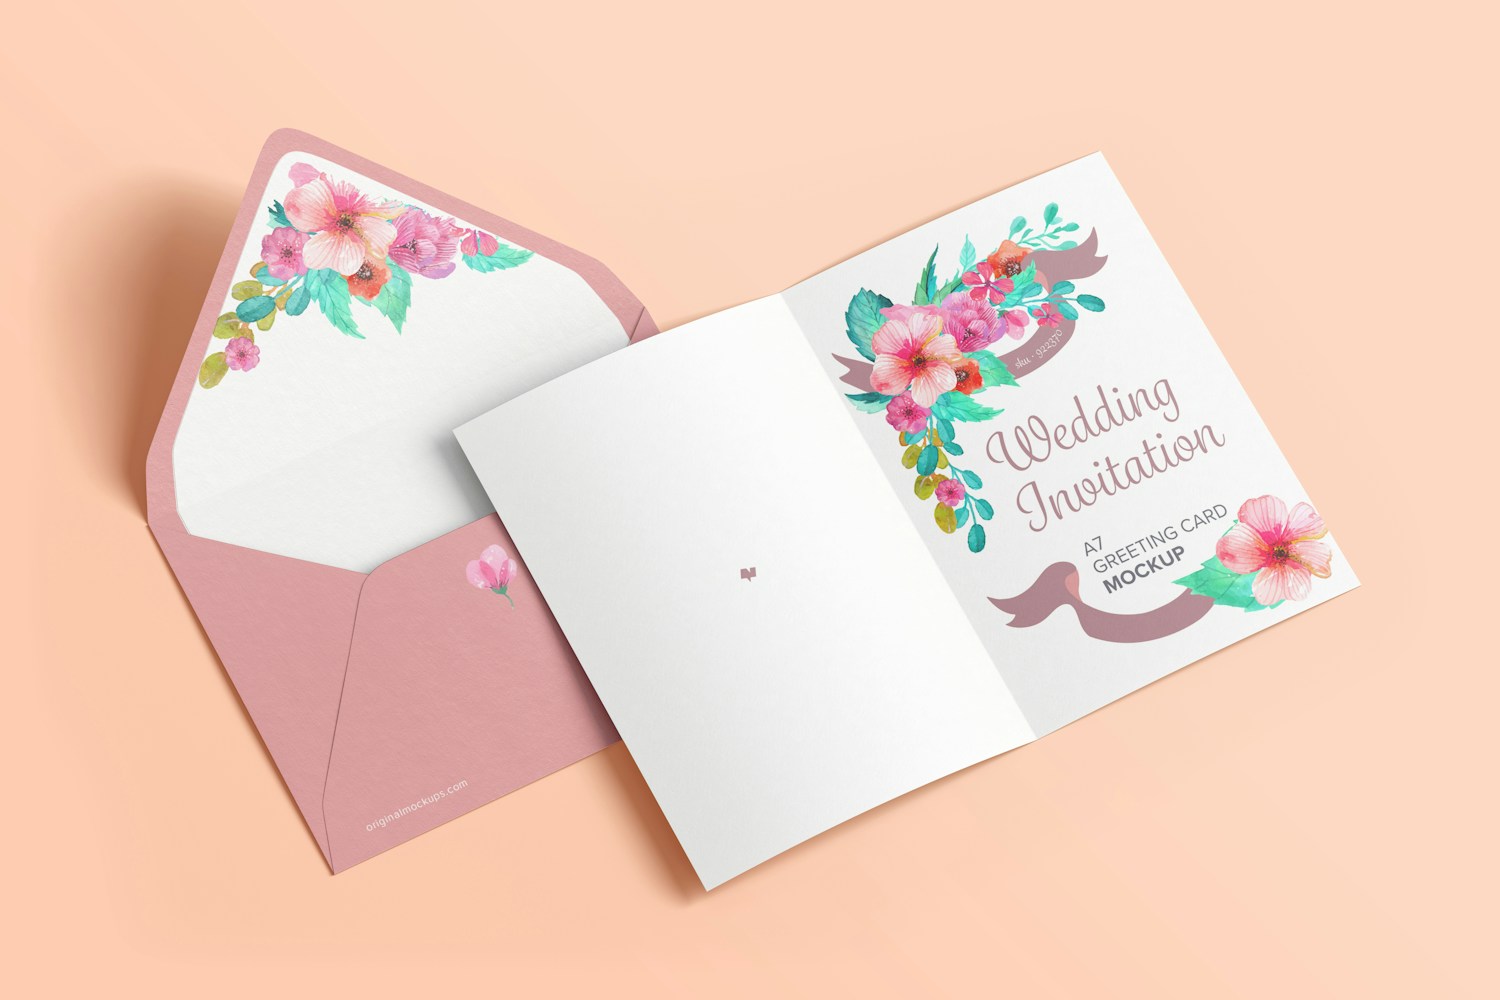 A7 Greeting Card Mockup with Envelope, Spread Pages